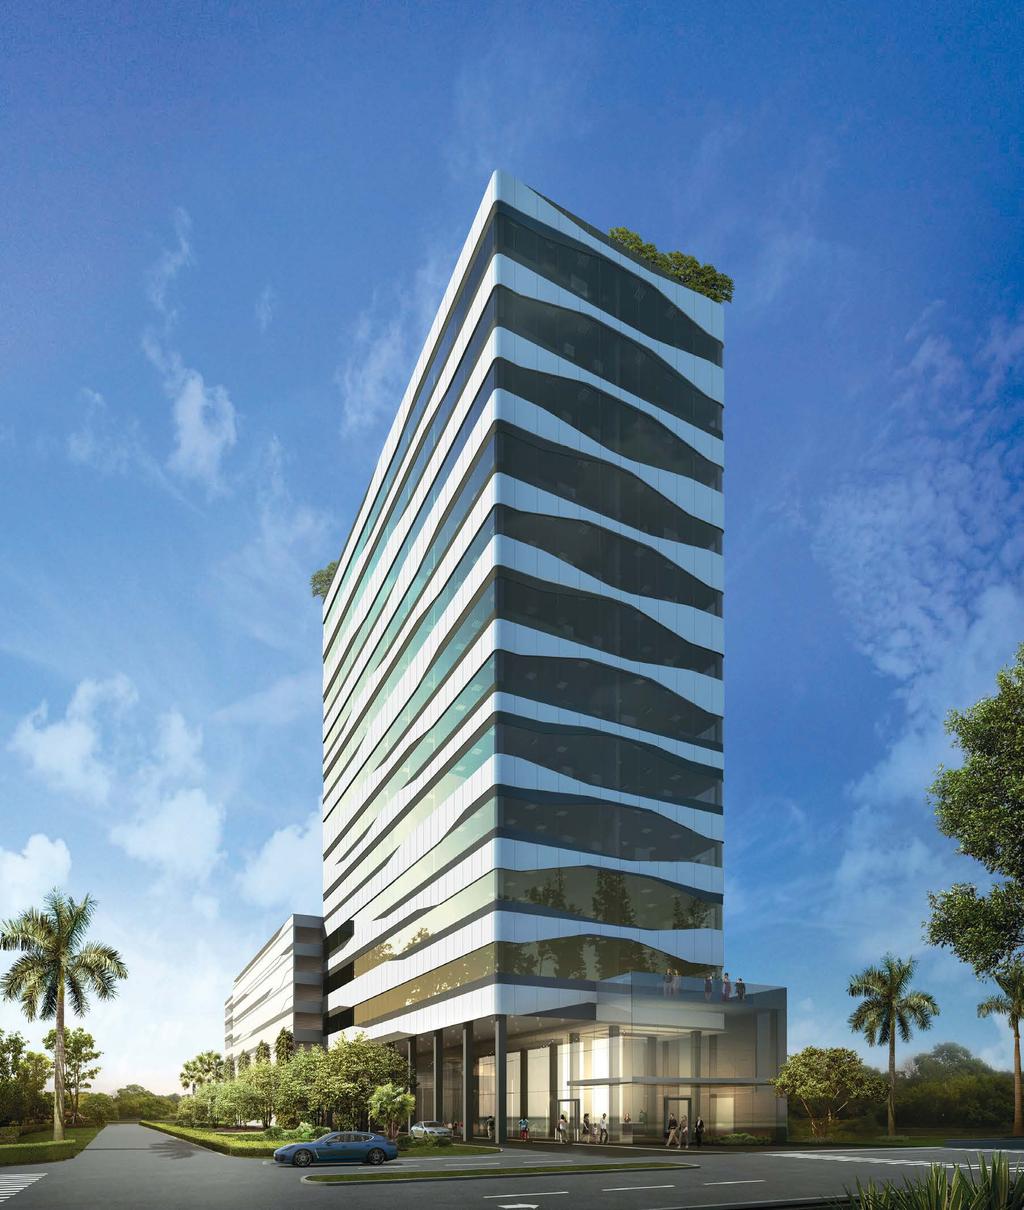 OWN YOUR WORKPLACE IN THE HEART OF AVENTURA DIRECTLY ACROSS FROM AVENTURA MALL Modern, sleek, and designed for today s visionary businesses, Forum Aventura is the pinnacle of office space ownership.